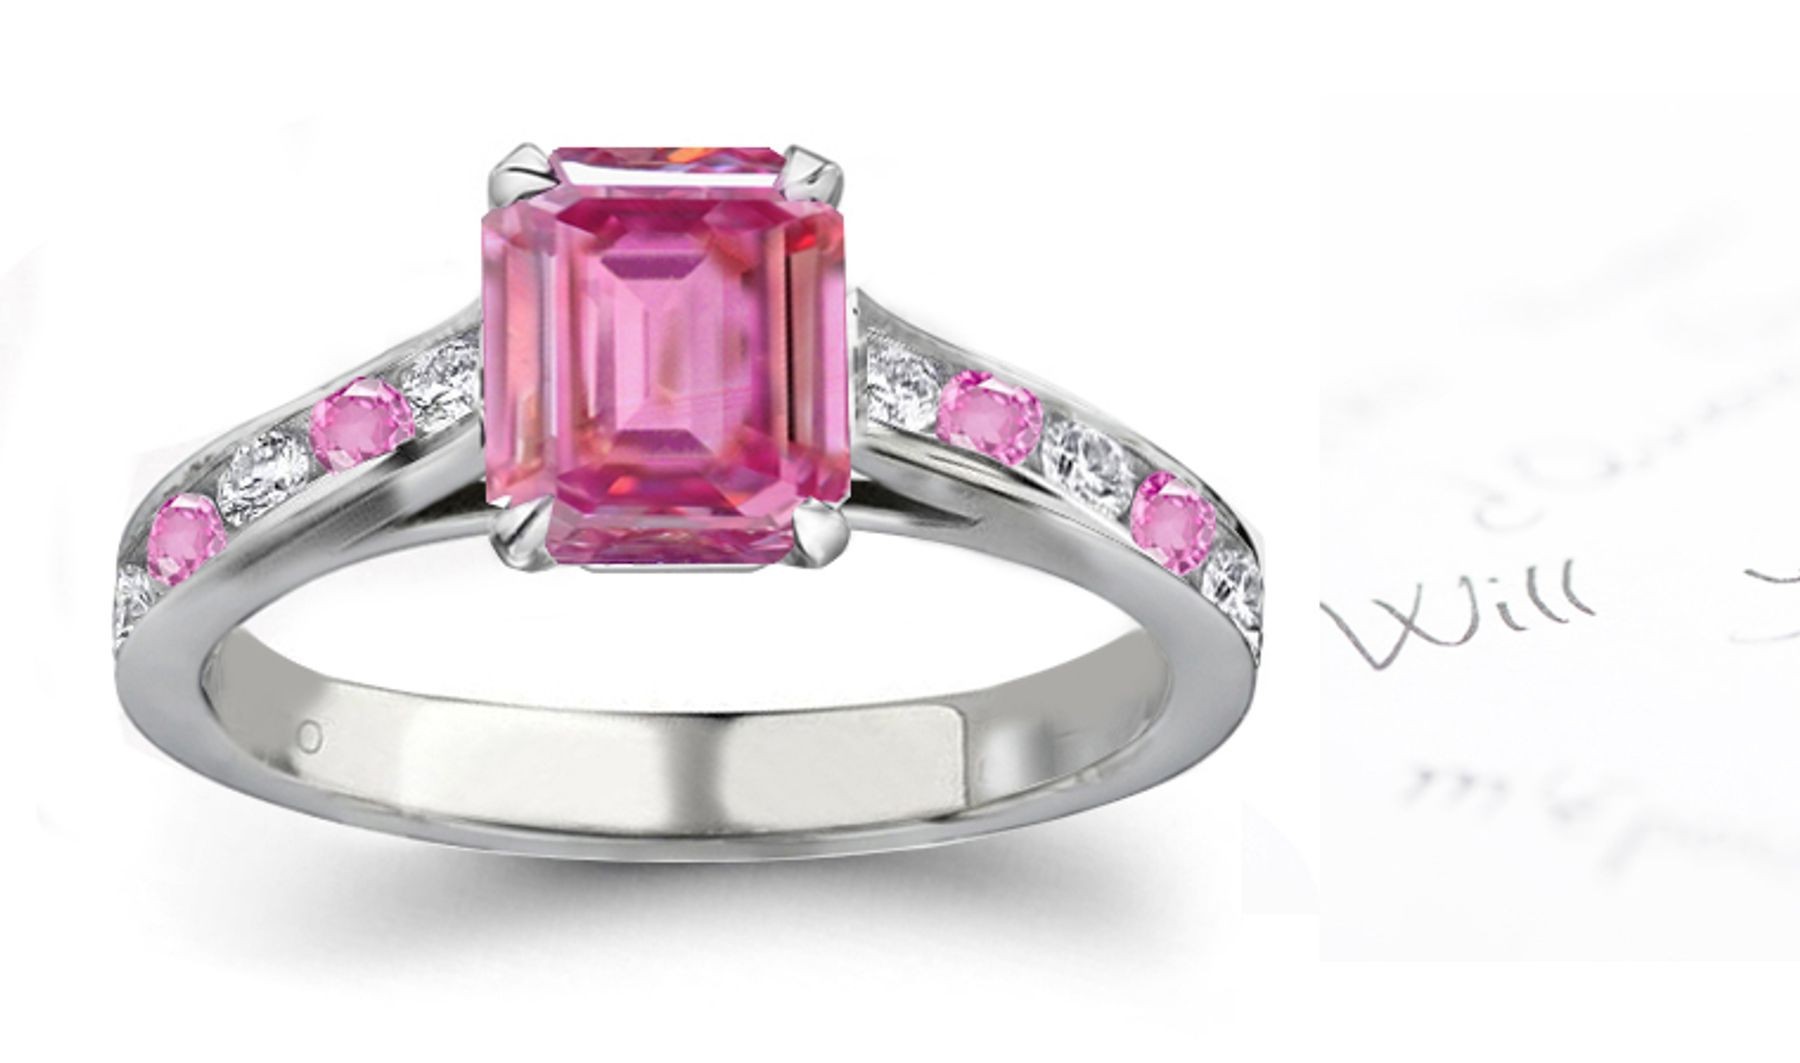 Val d' Arno Gallery: Emerald Cut Ladies Pink Sapphire & White Diamonds Ring 